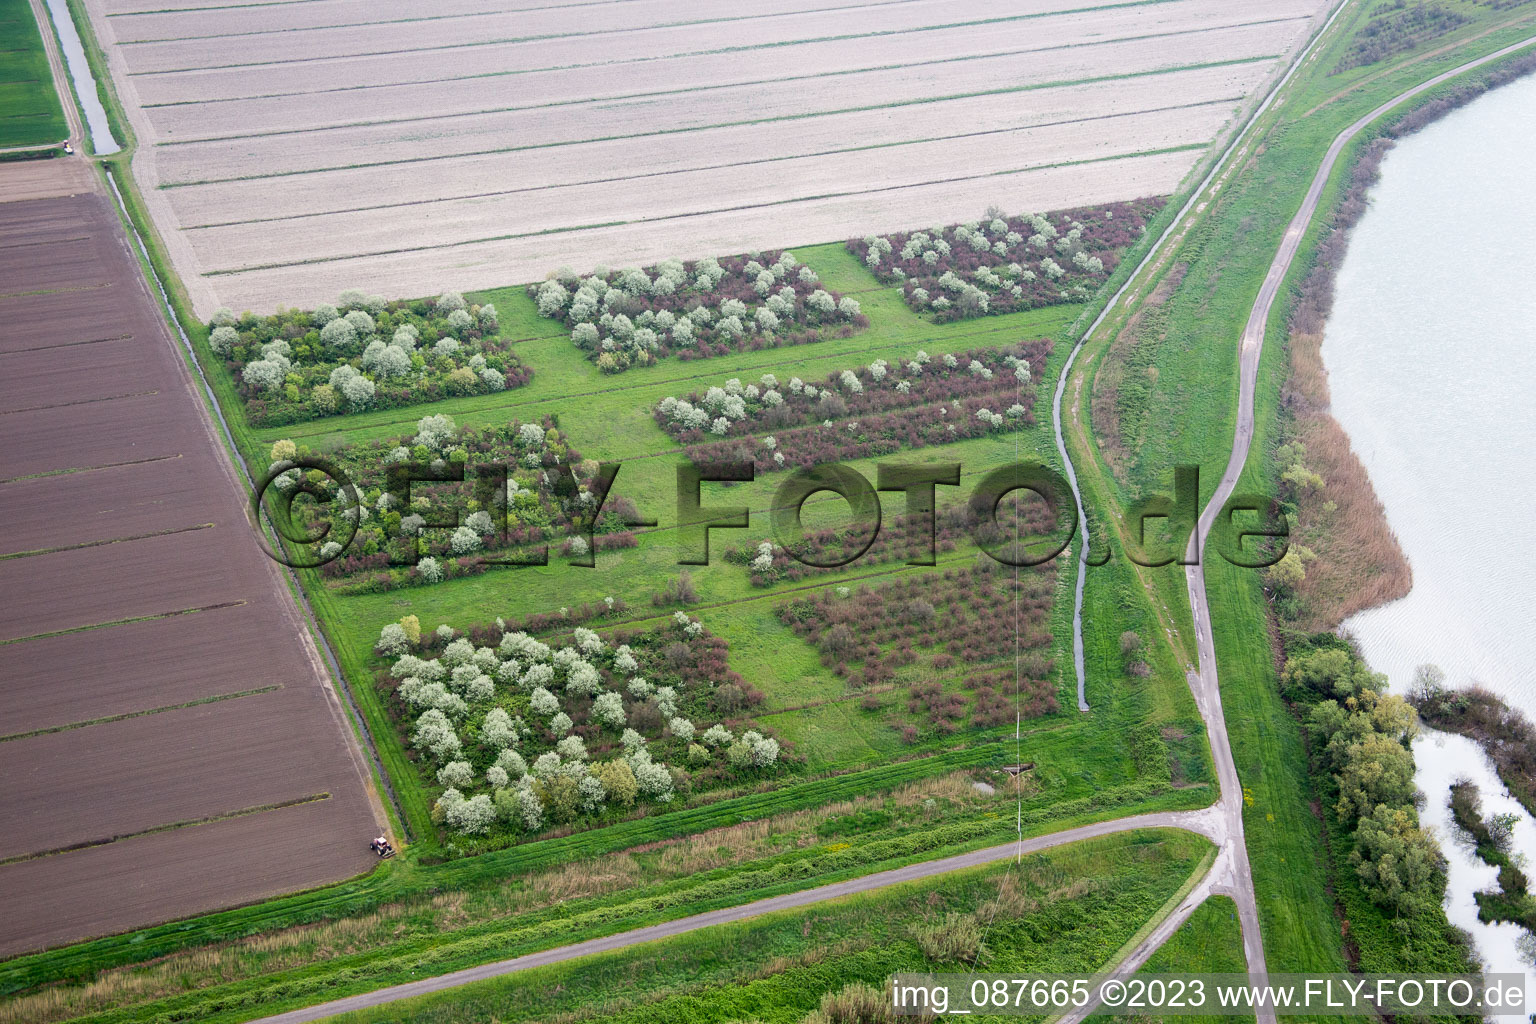 Aerial photograpy of Pellestrina in the state Veneto, Italy